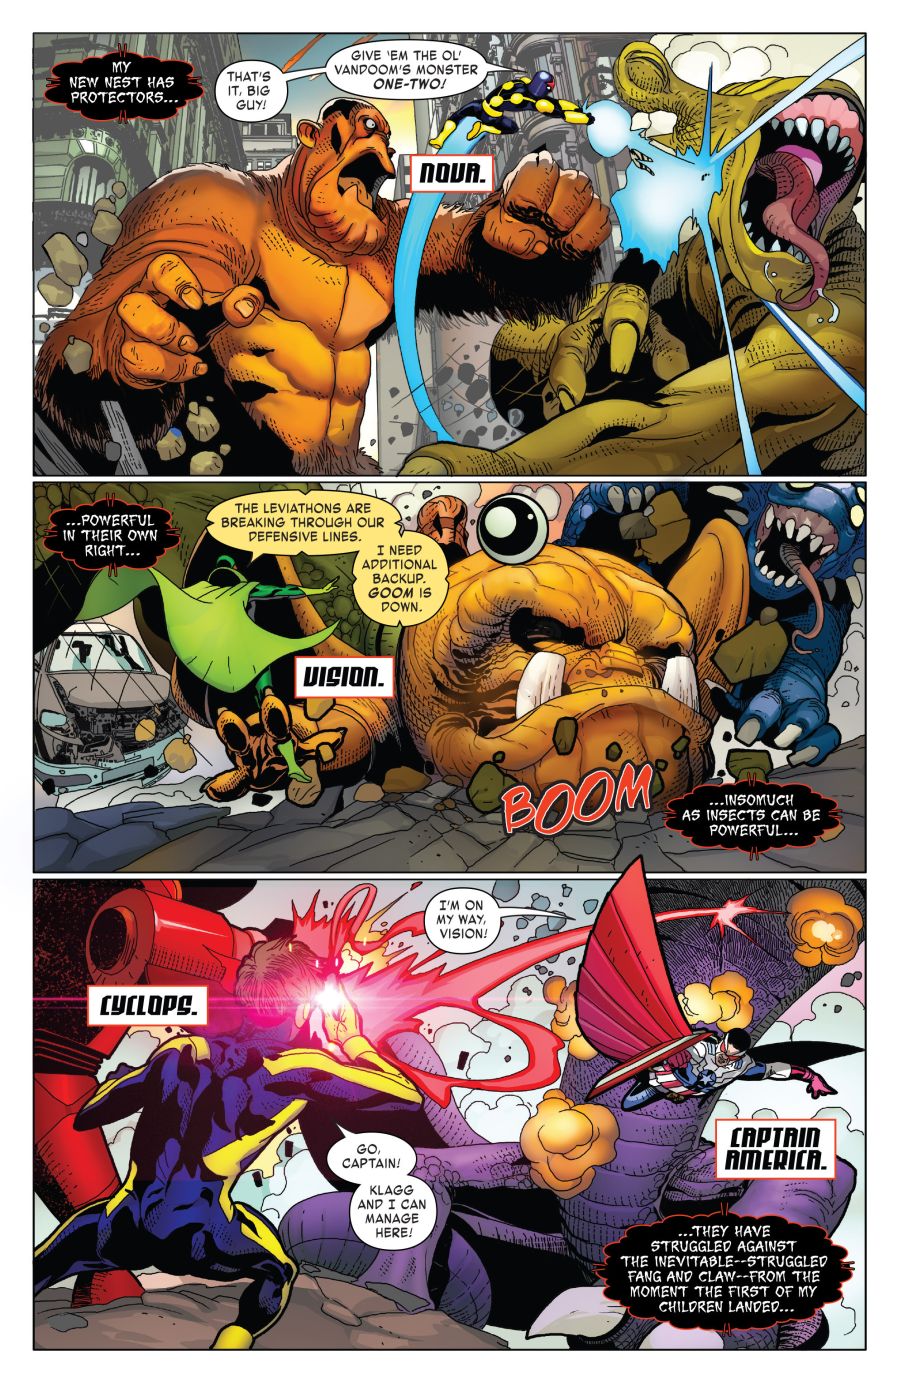 Monsters Unleashed! #4